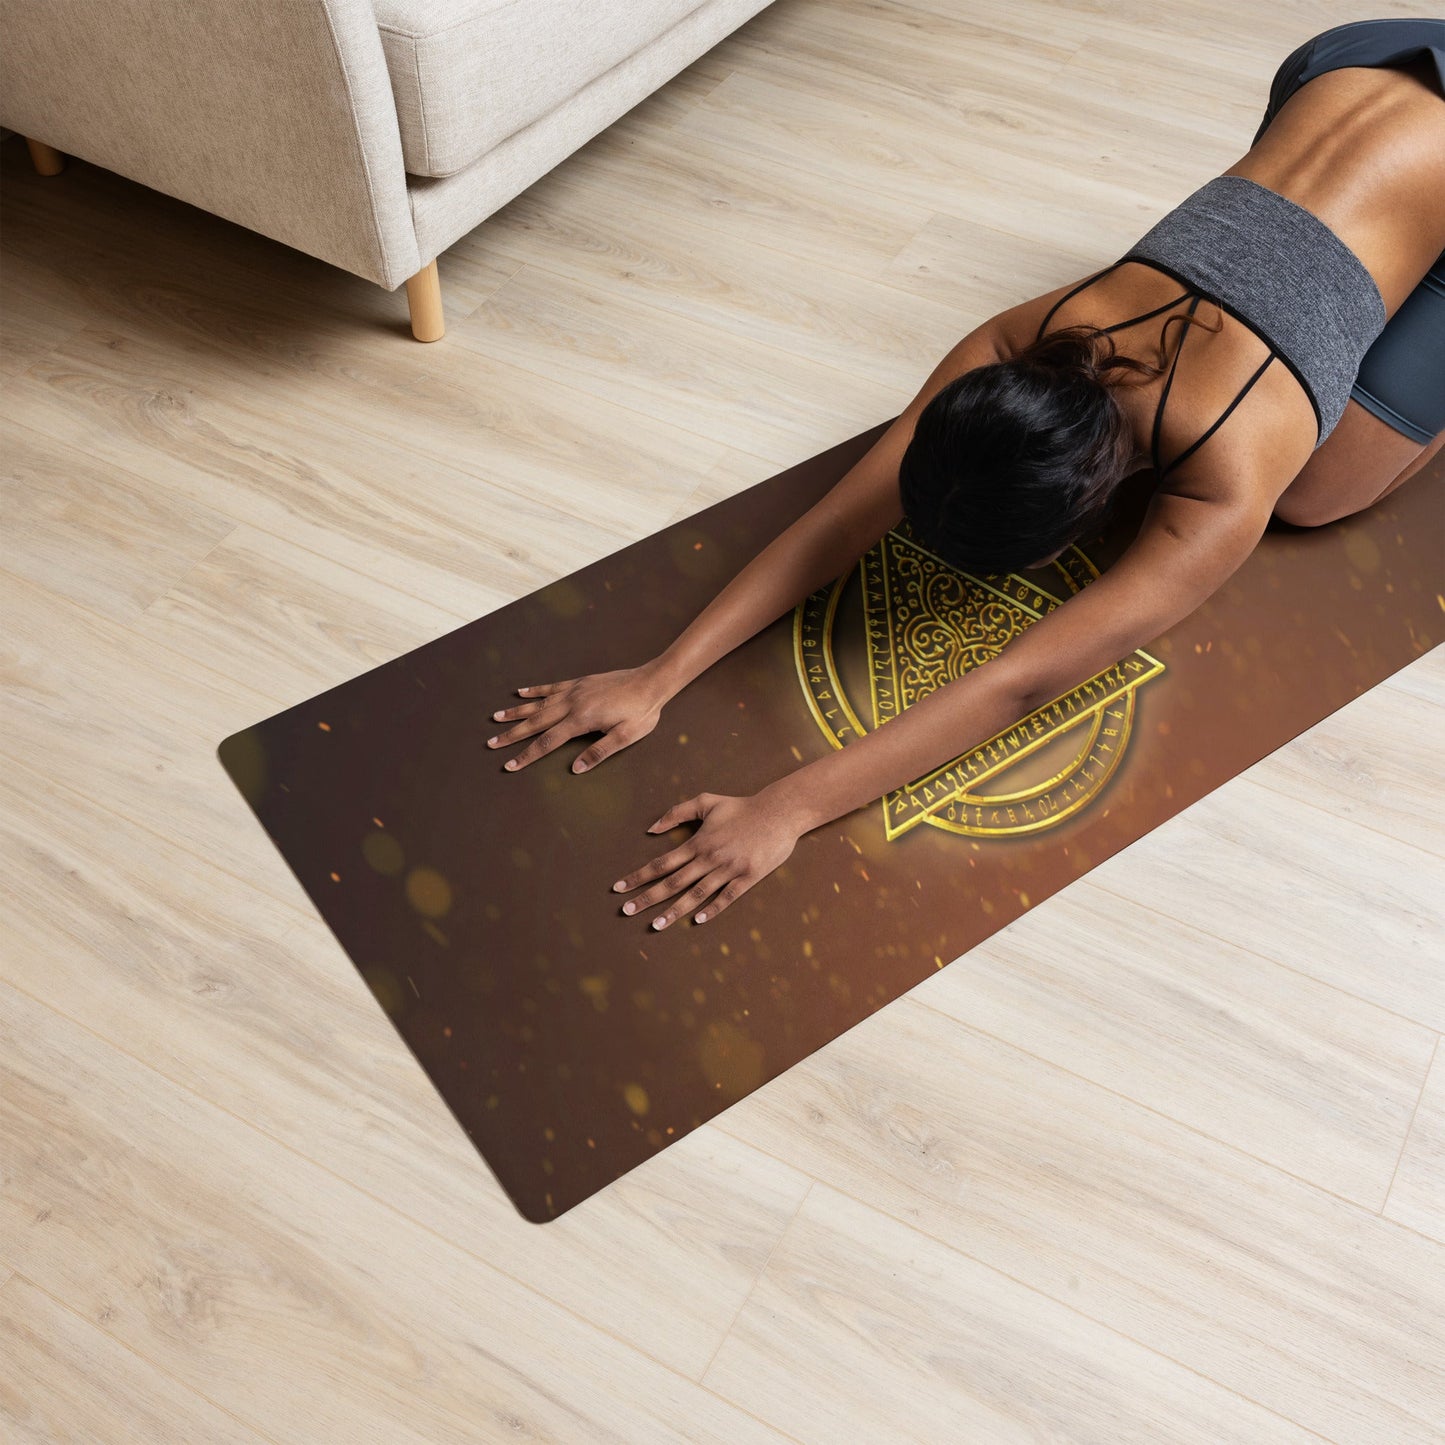 Yoga mat | The Last Rite | Tattoo - Spectral Ink Shop - -3214538_16714